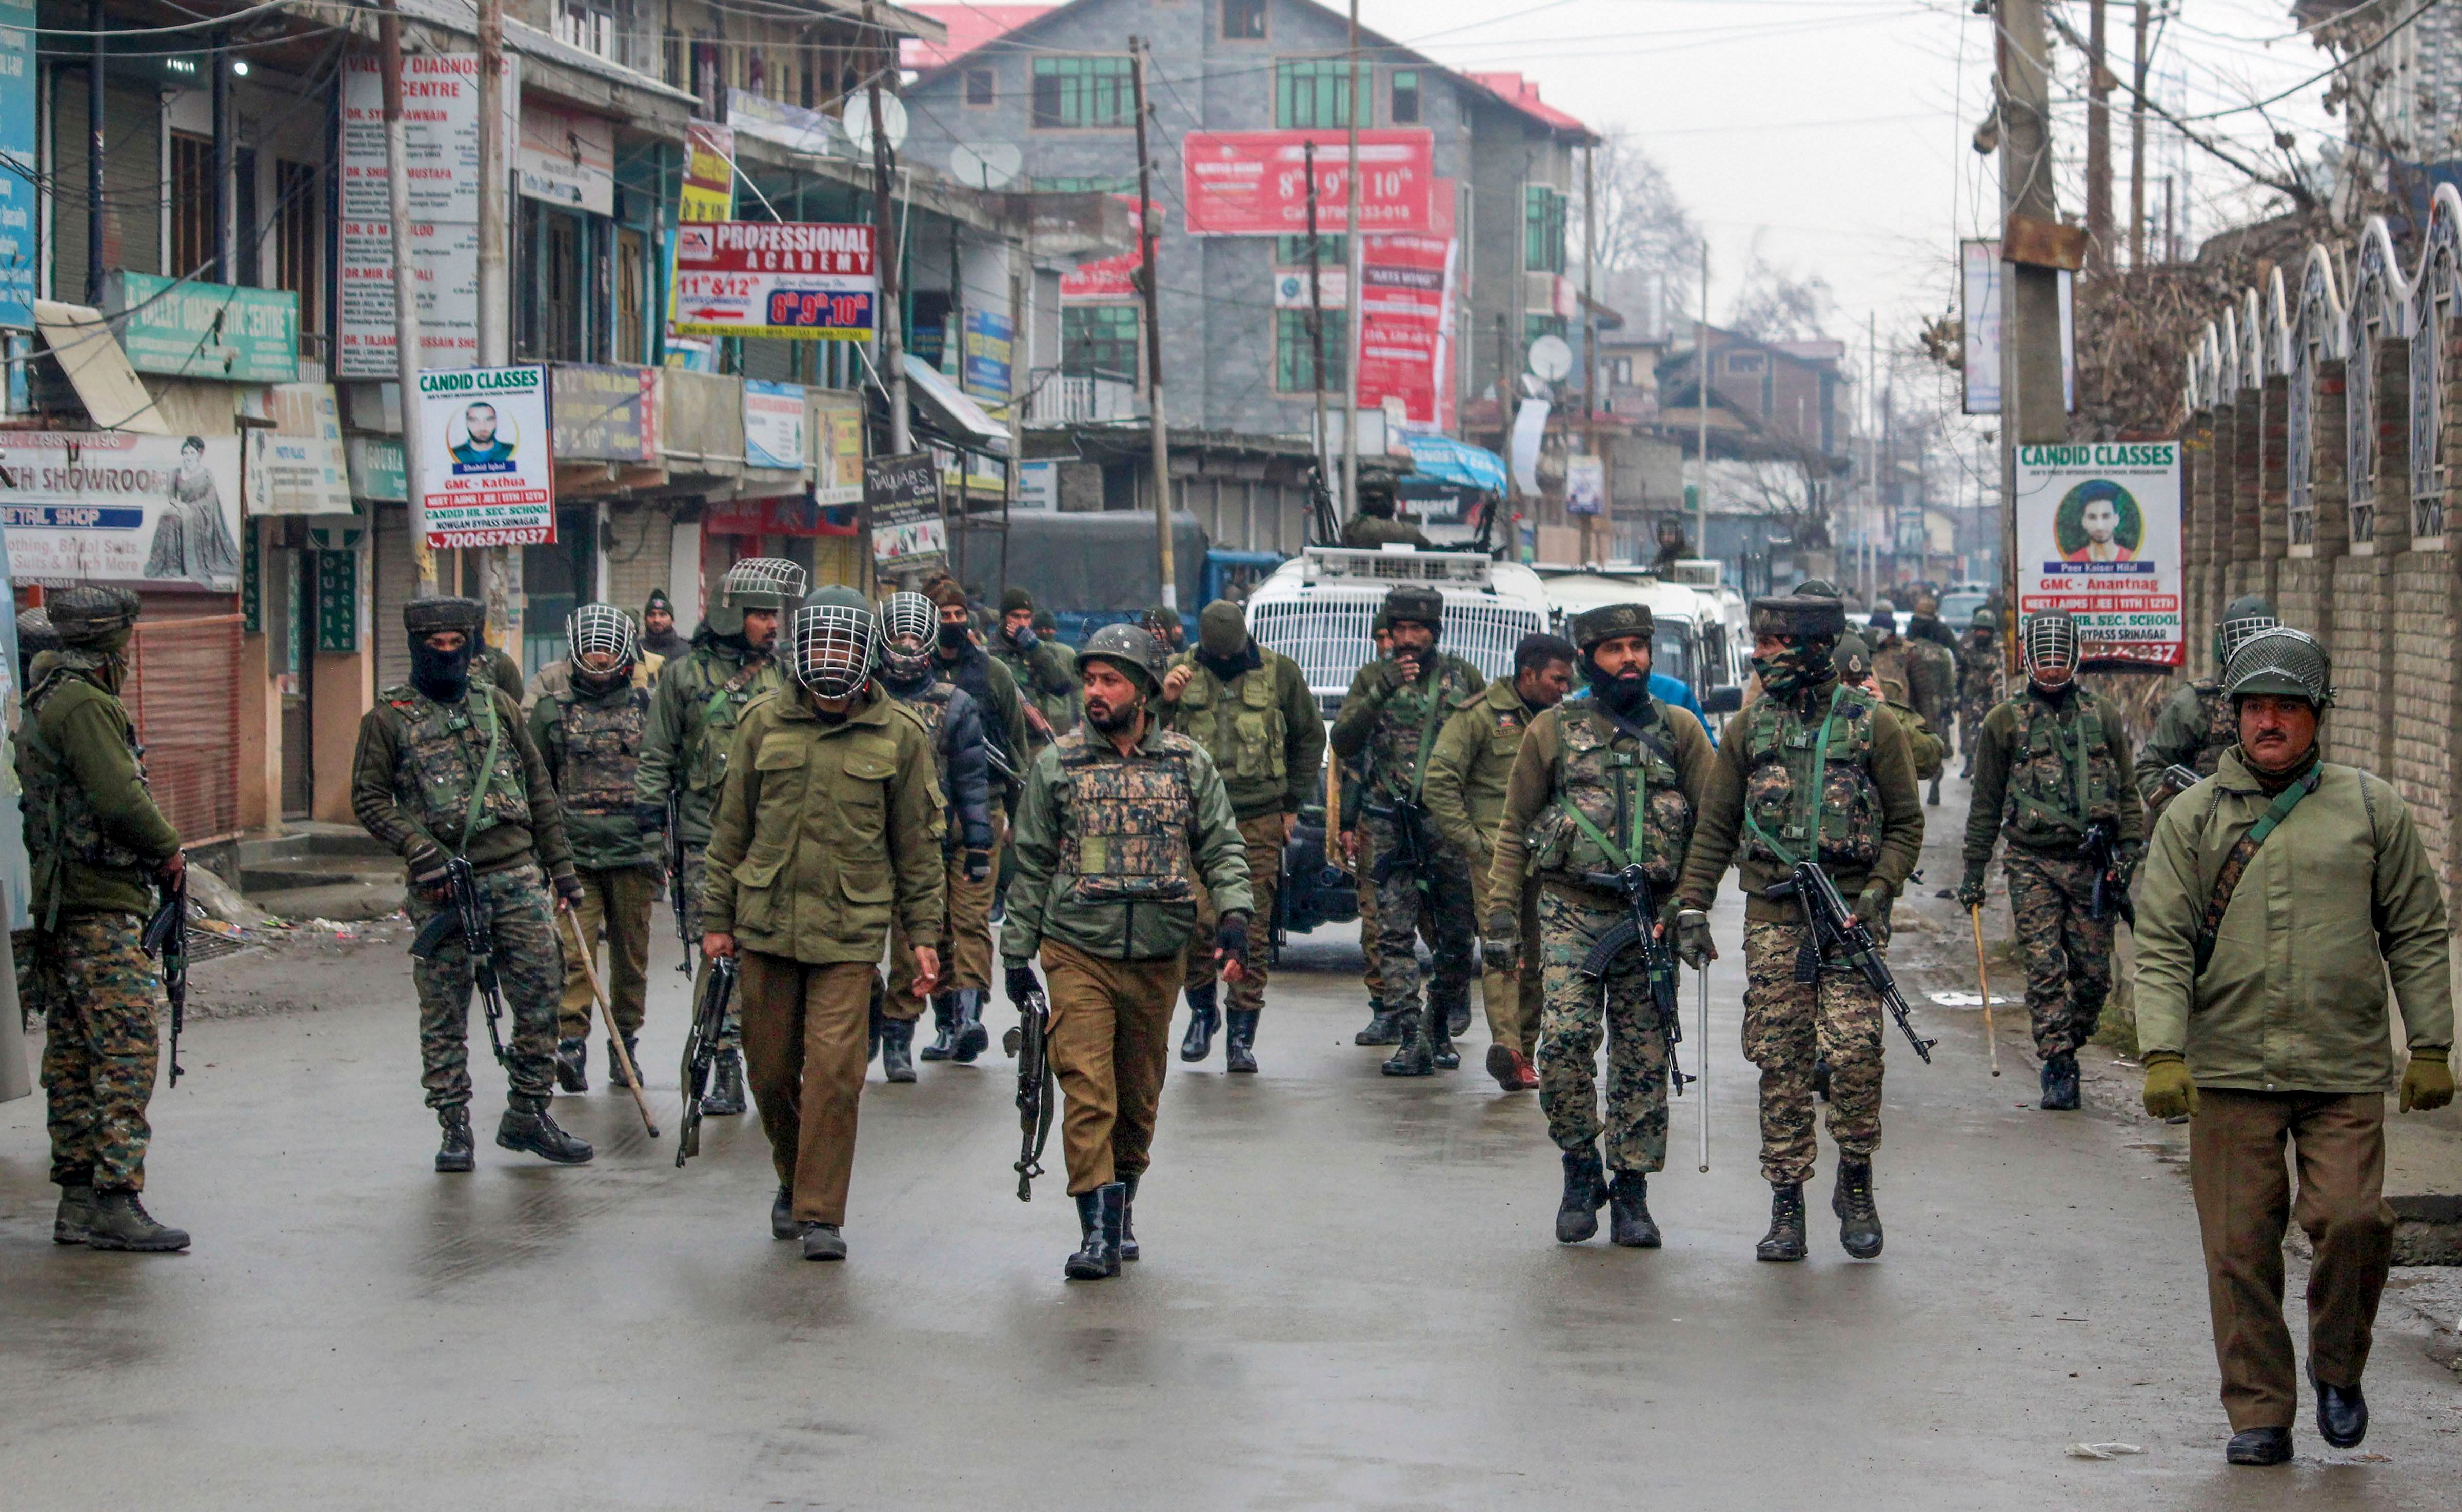 ecurity personnel patrol a street after clashes which erupted after a police vehicle collided with a car in an accident killing a 10th class student Tehseen Ahmed Bhat, at Nowgam in Srinagar. (PTI Photo)